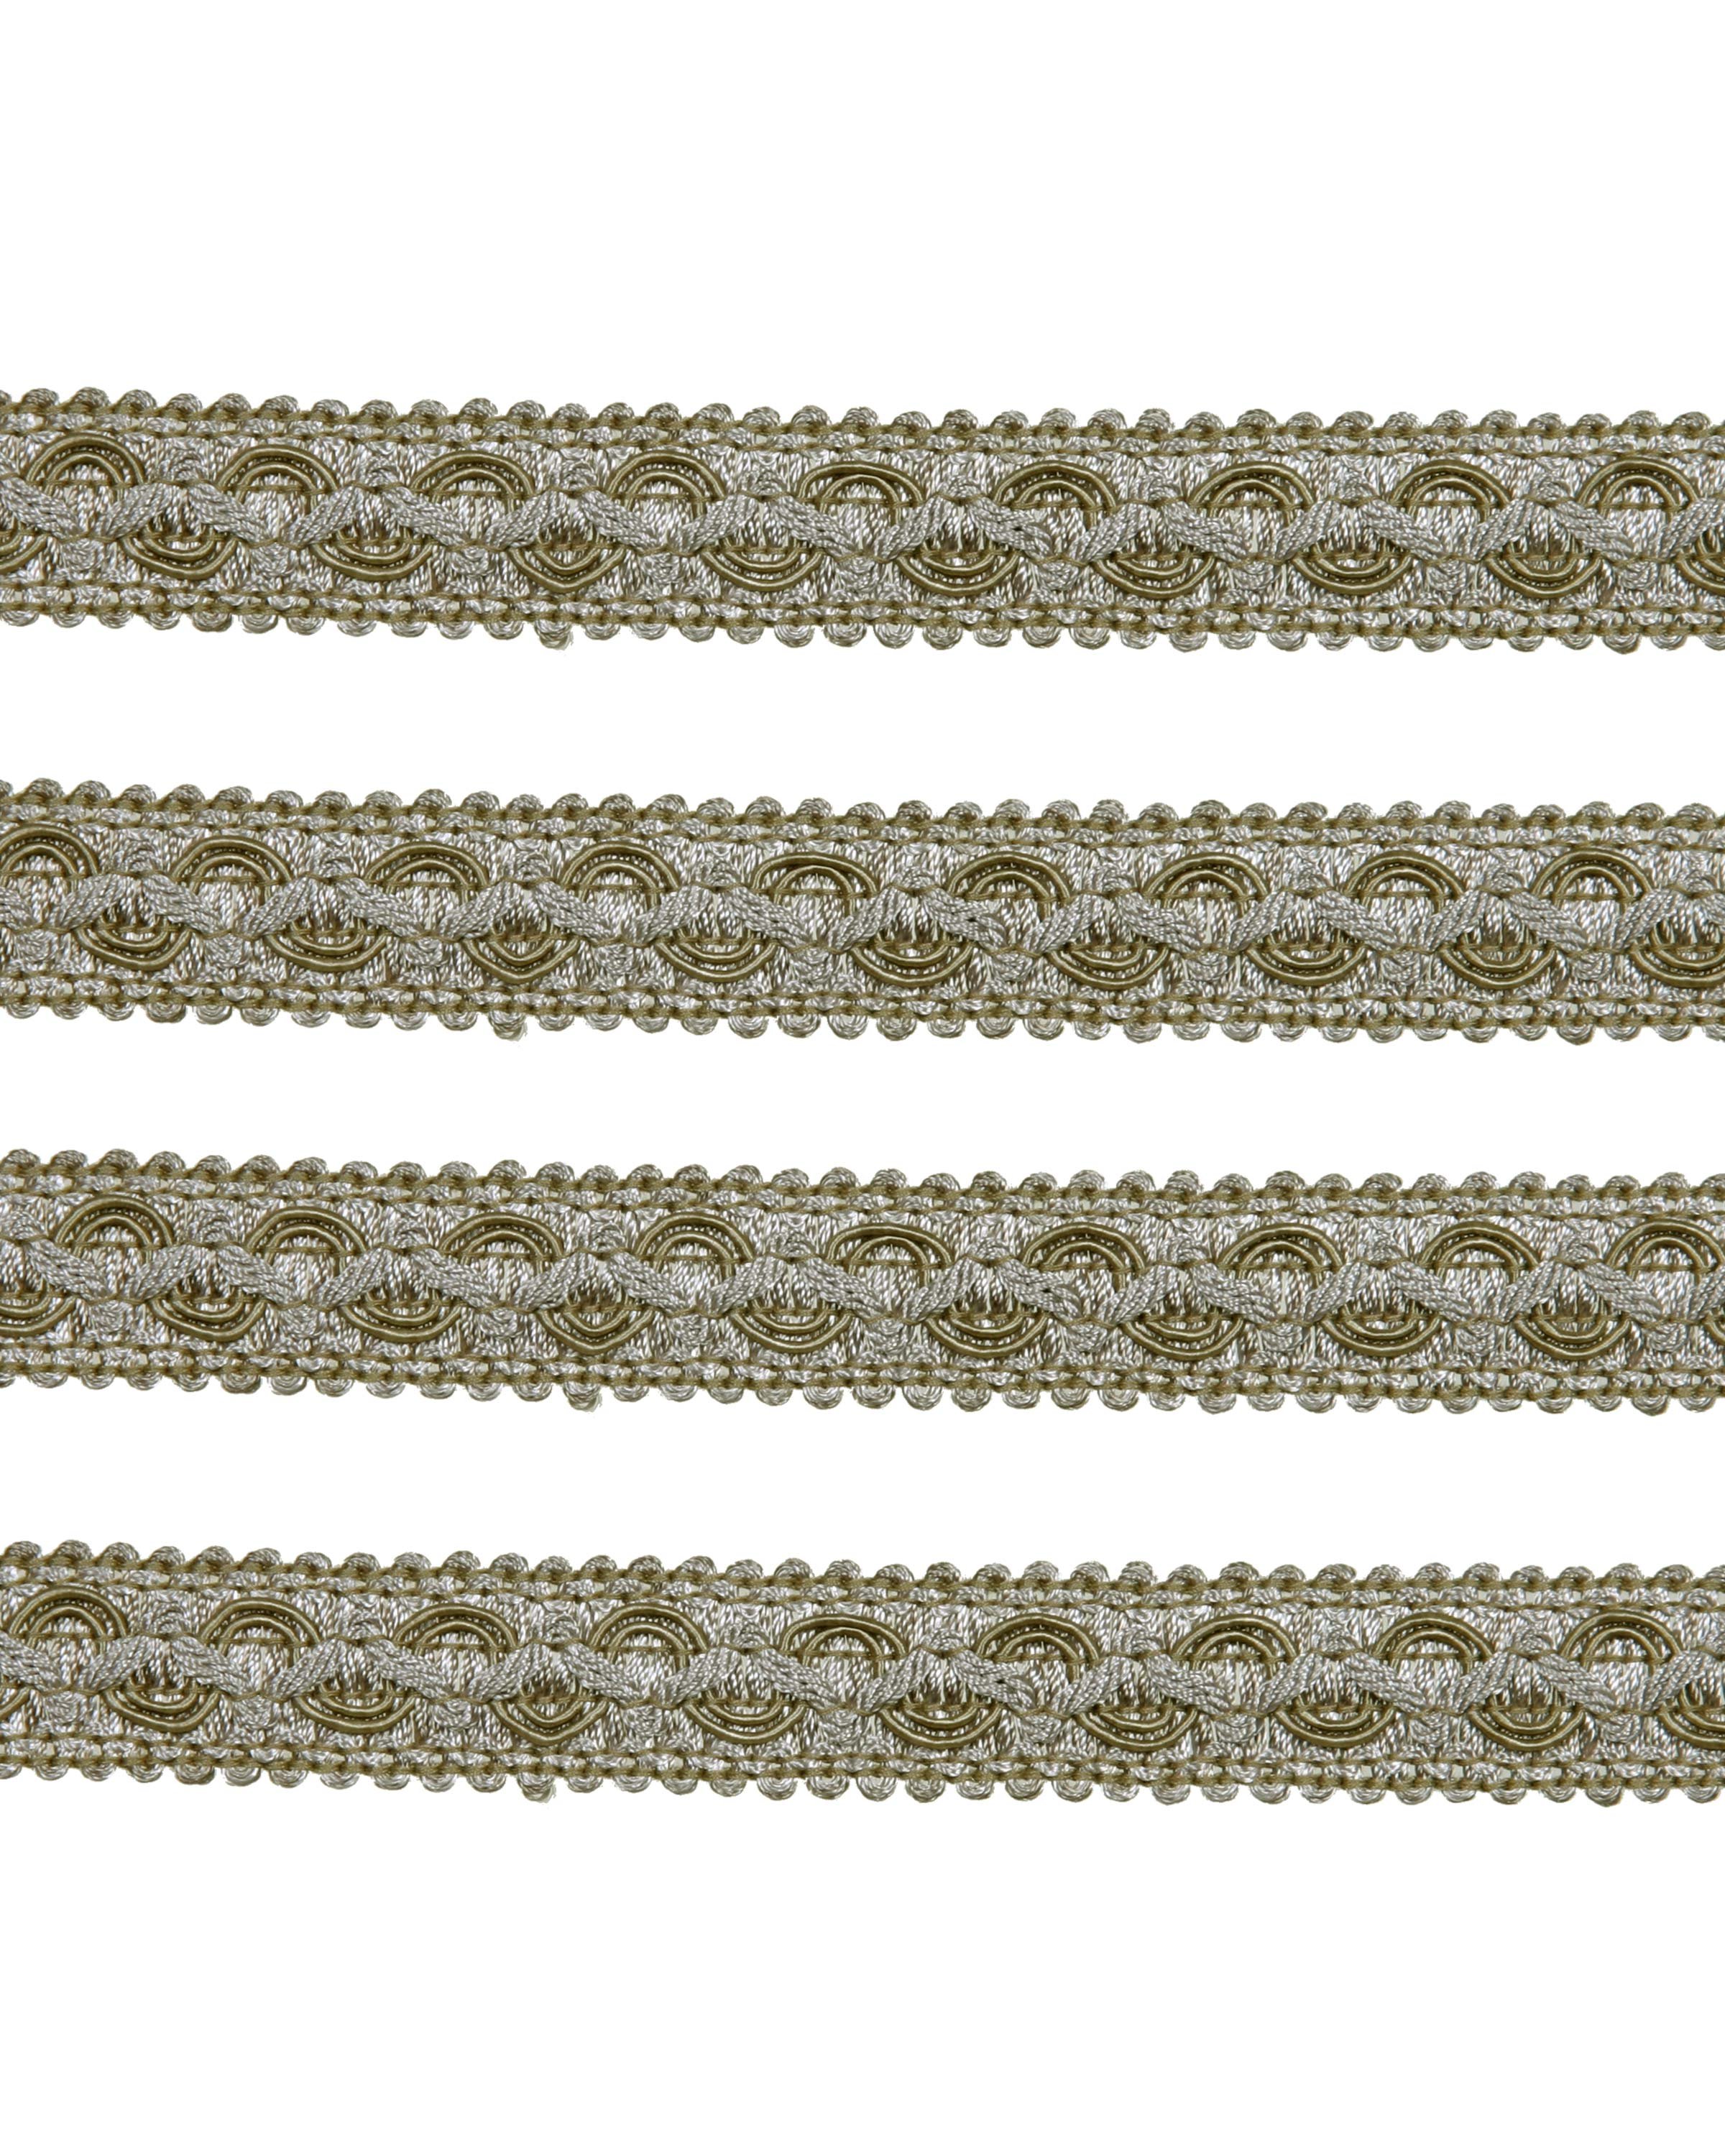 Ornate Braid - Taupe 20mm Price is for 5 metres